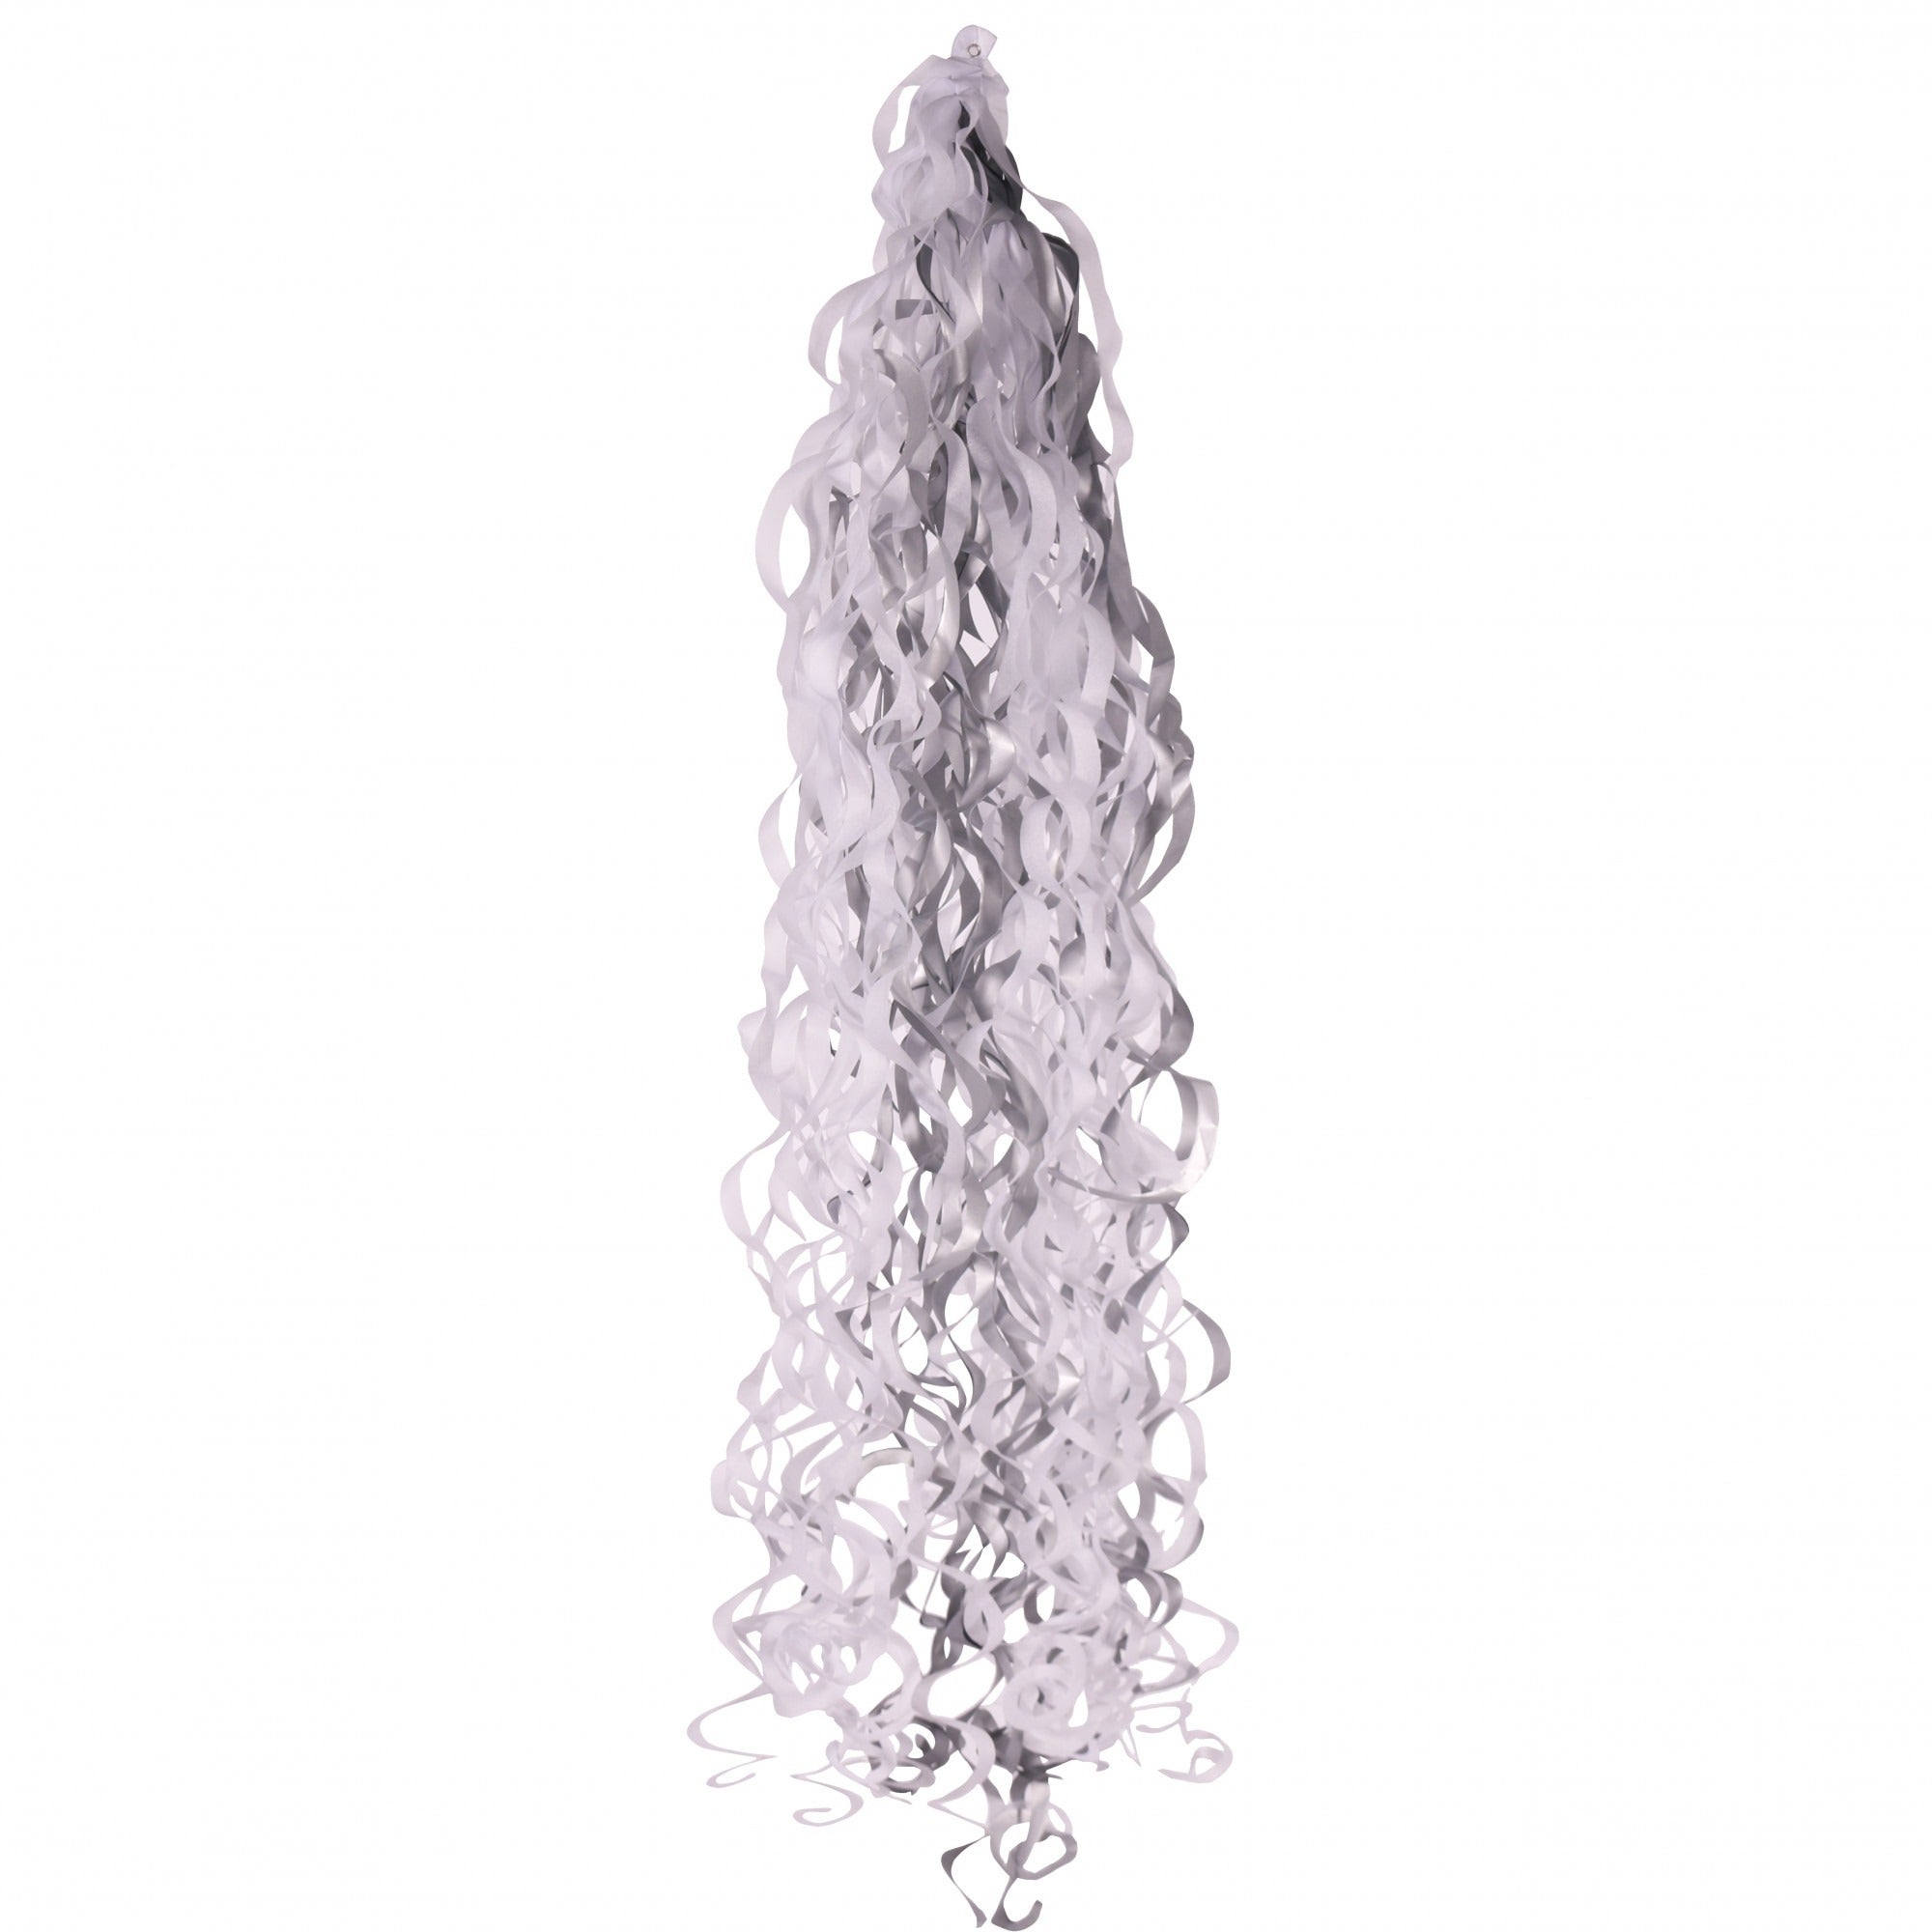 View Metallic Silver White Balloon Tassels For 18 Inch Balloons information